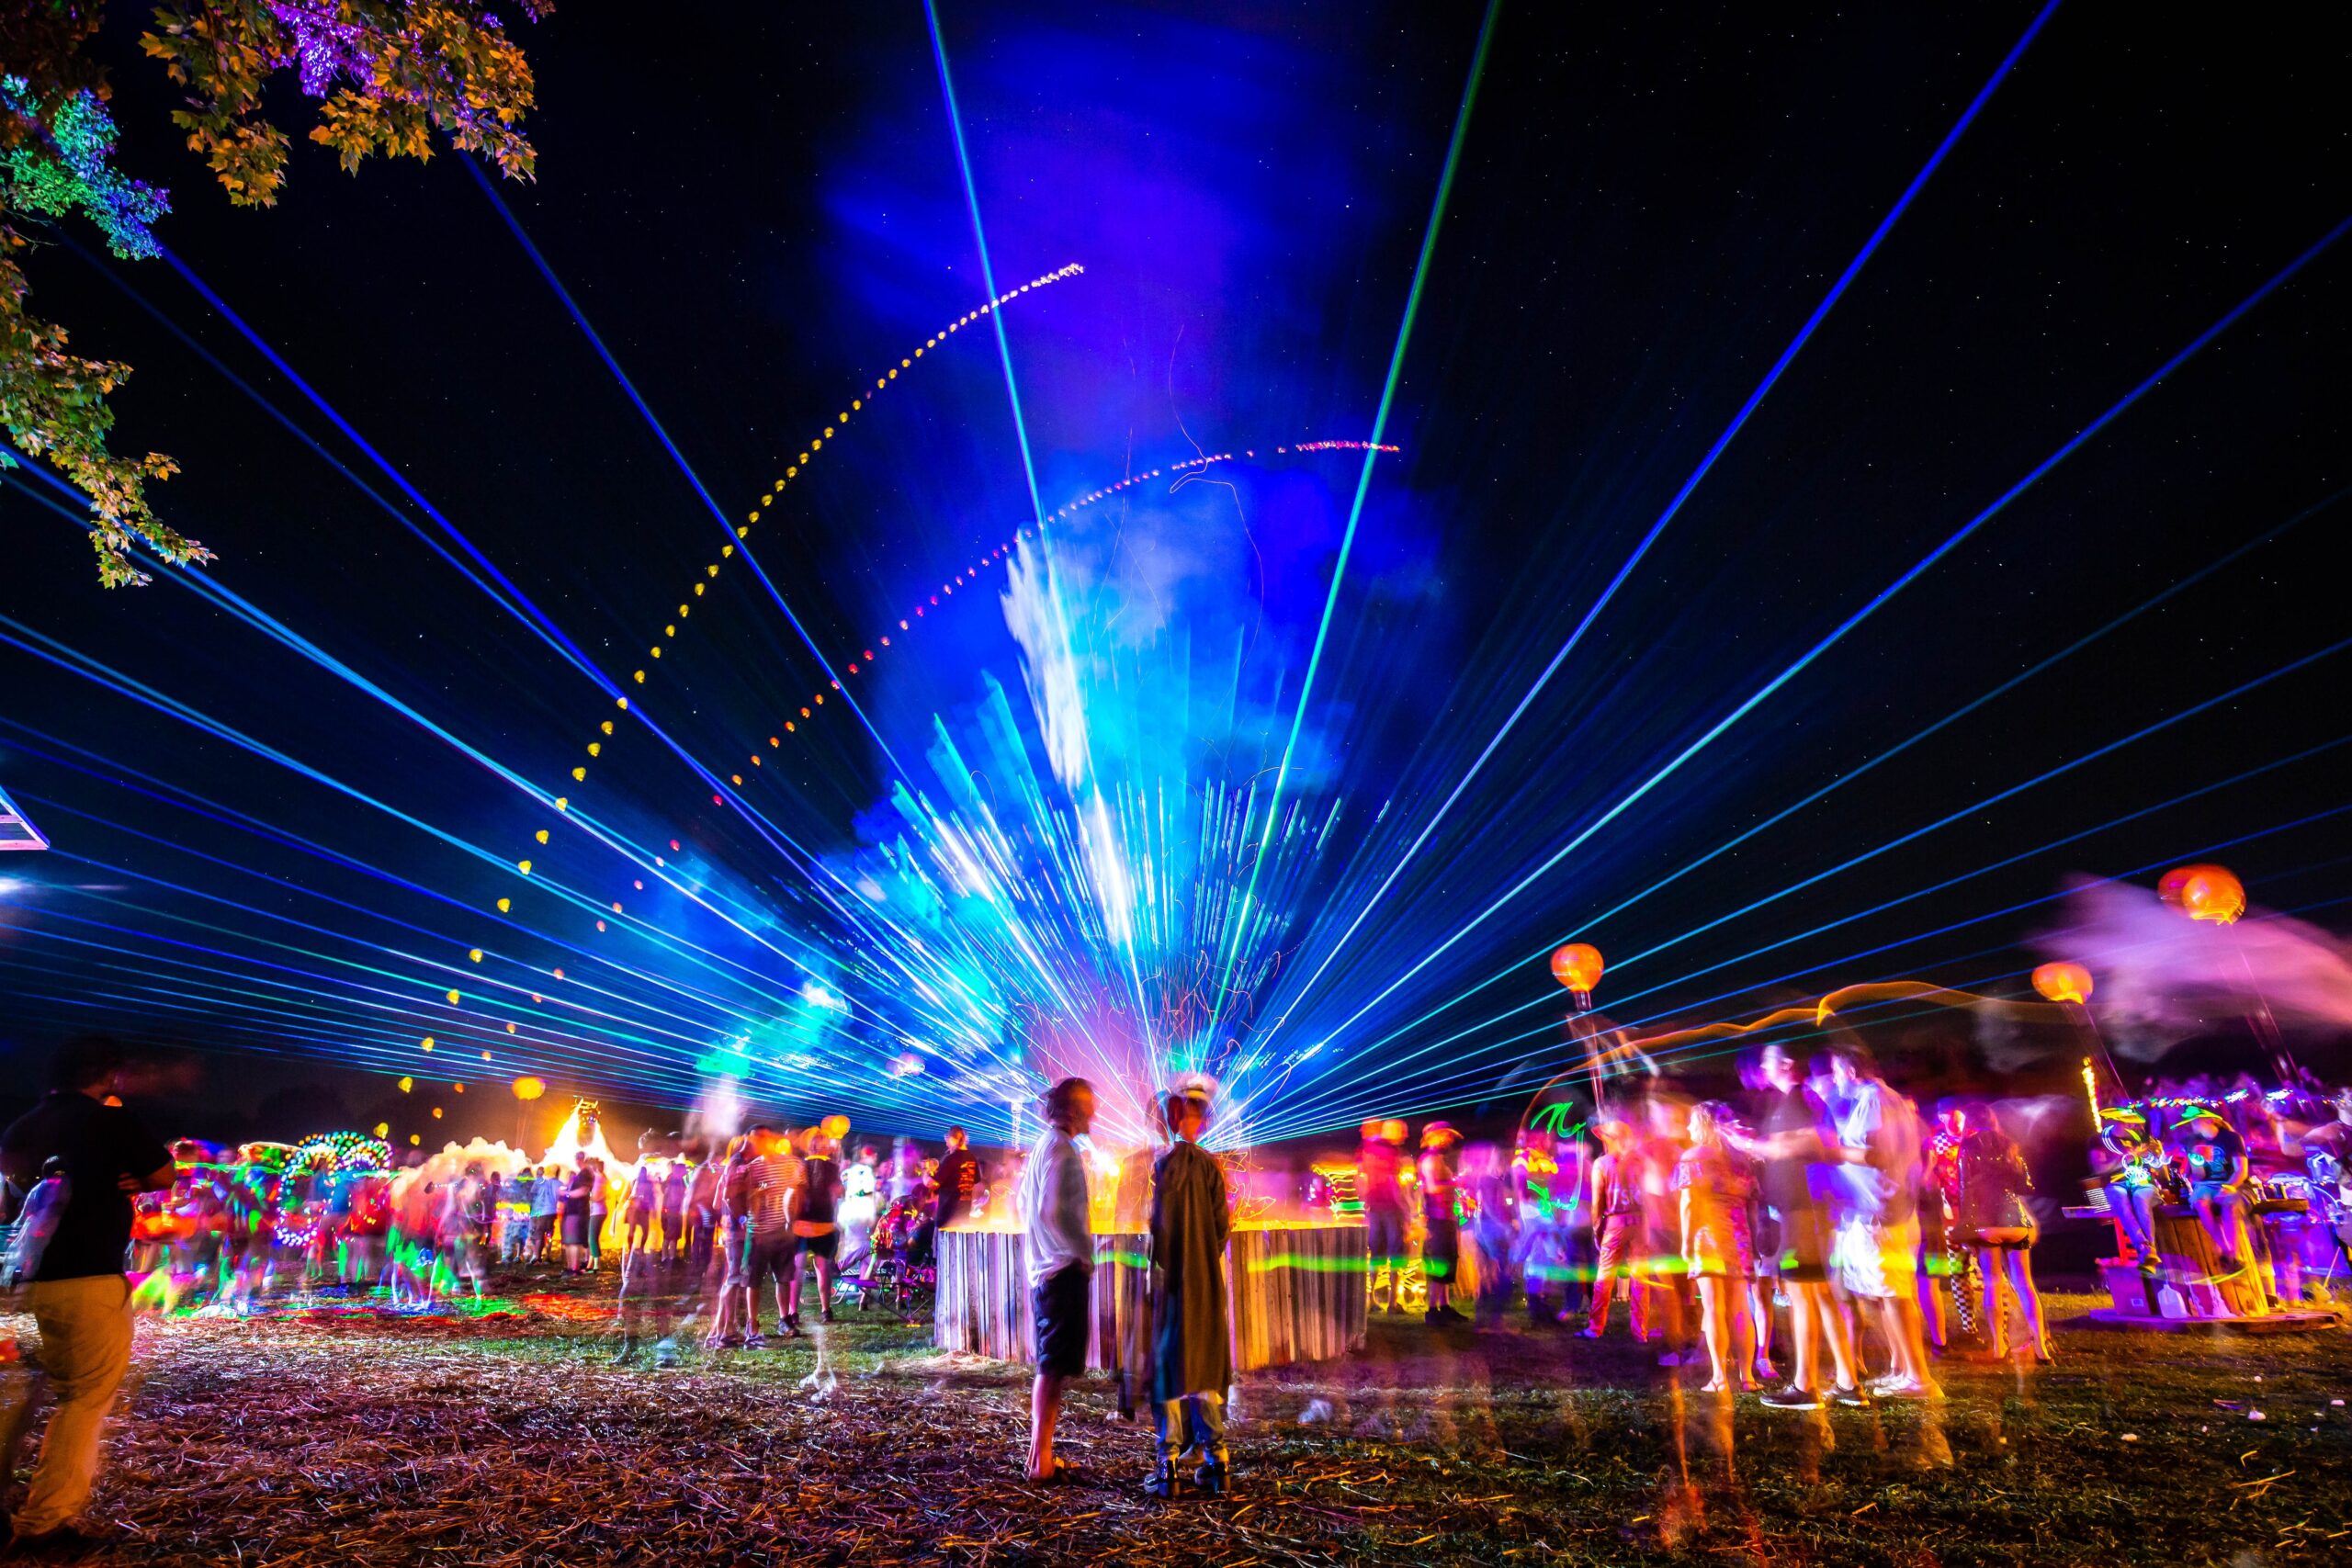 An artistically blurred photo of an independent or underground music party at night, with colorful lights and lasers leaking into the sky, as people cluster about in groups enjoying themselves.